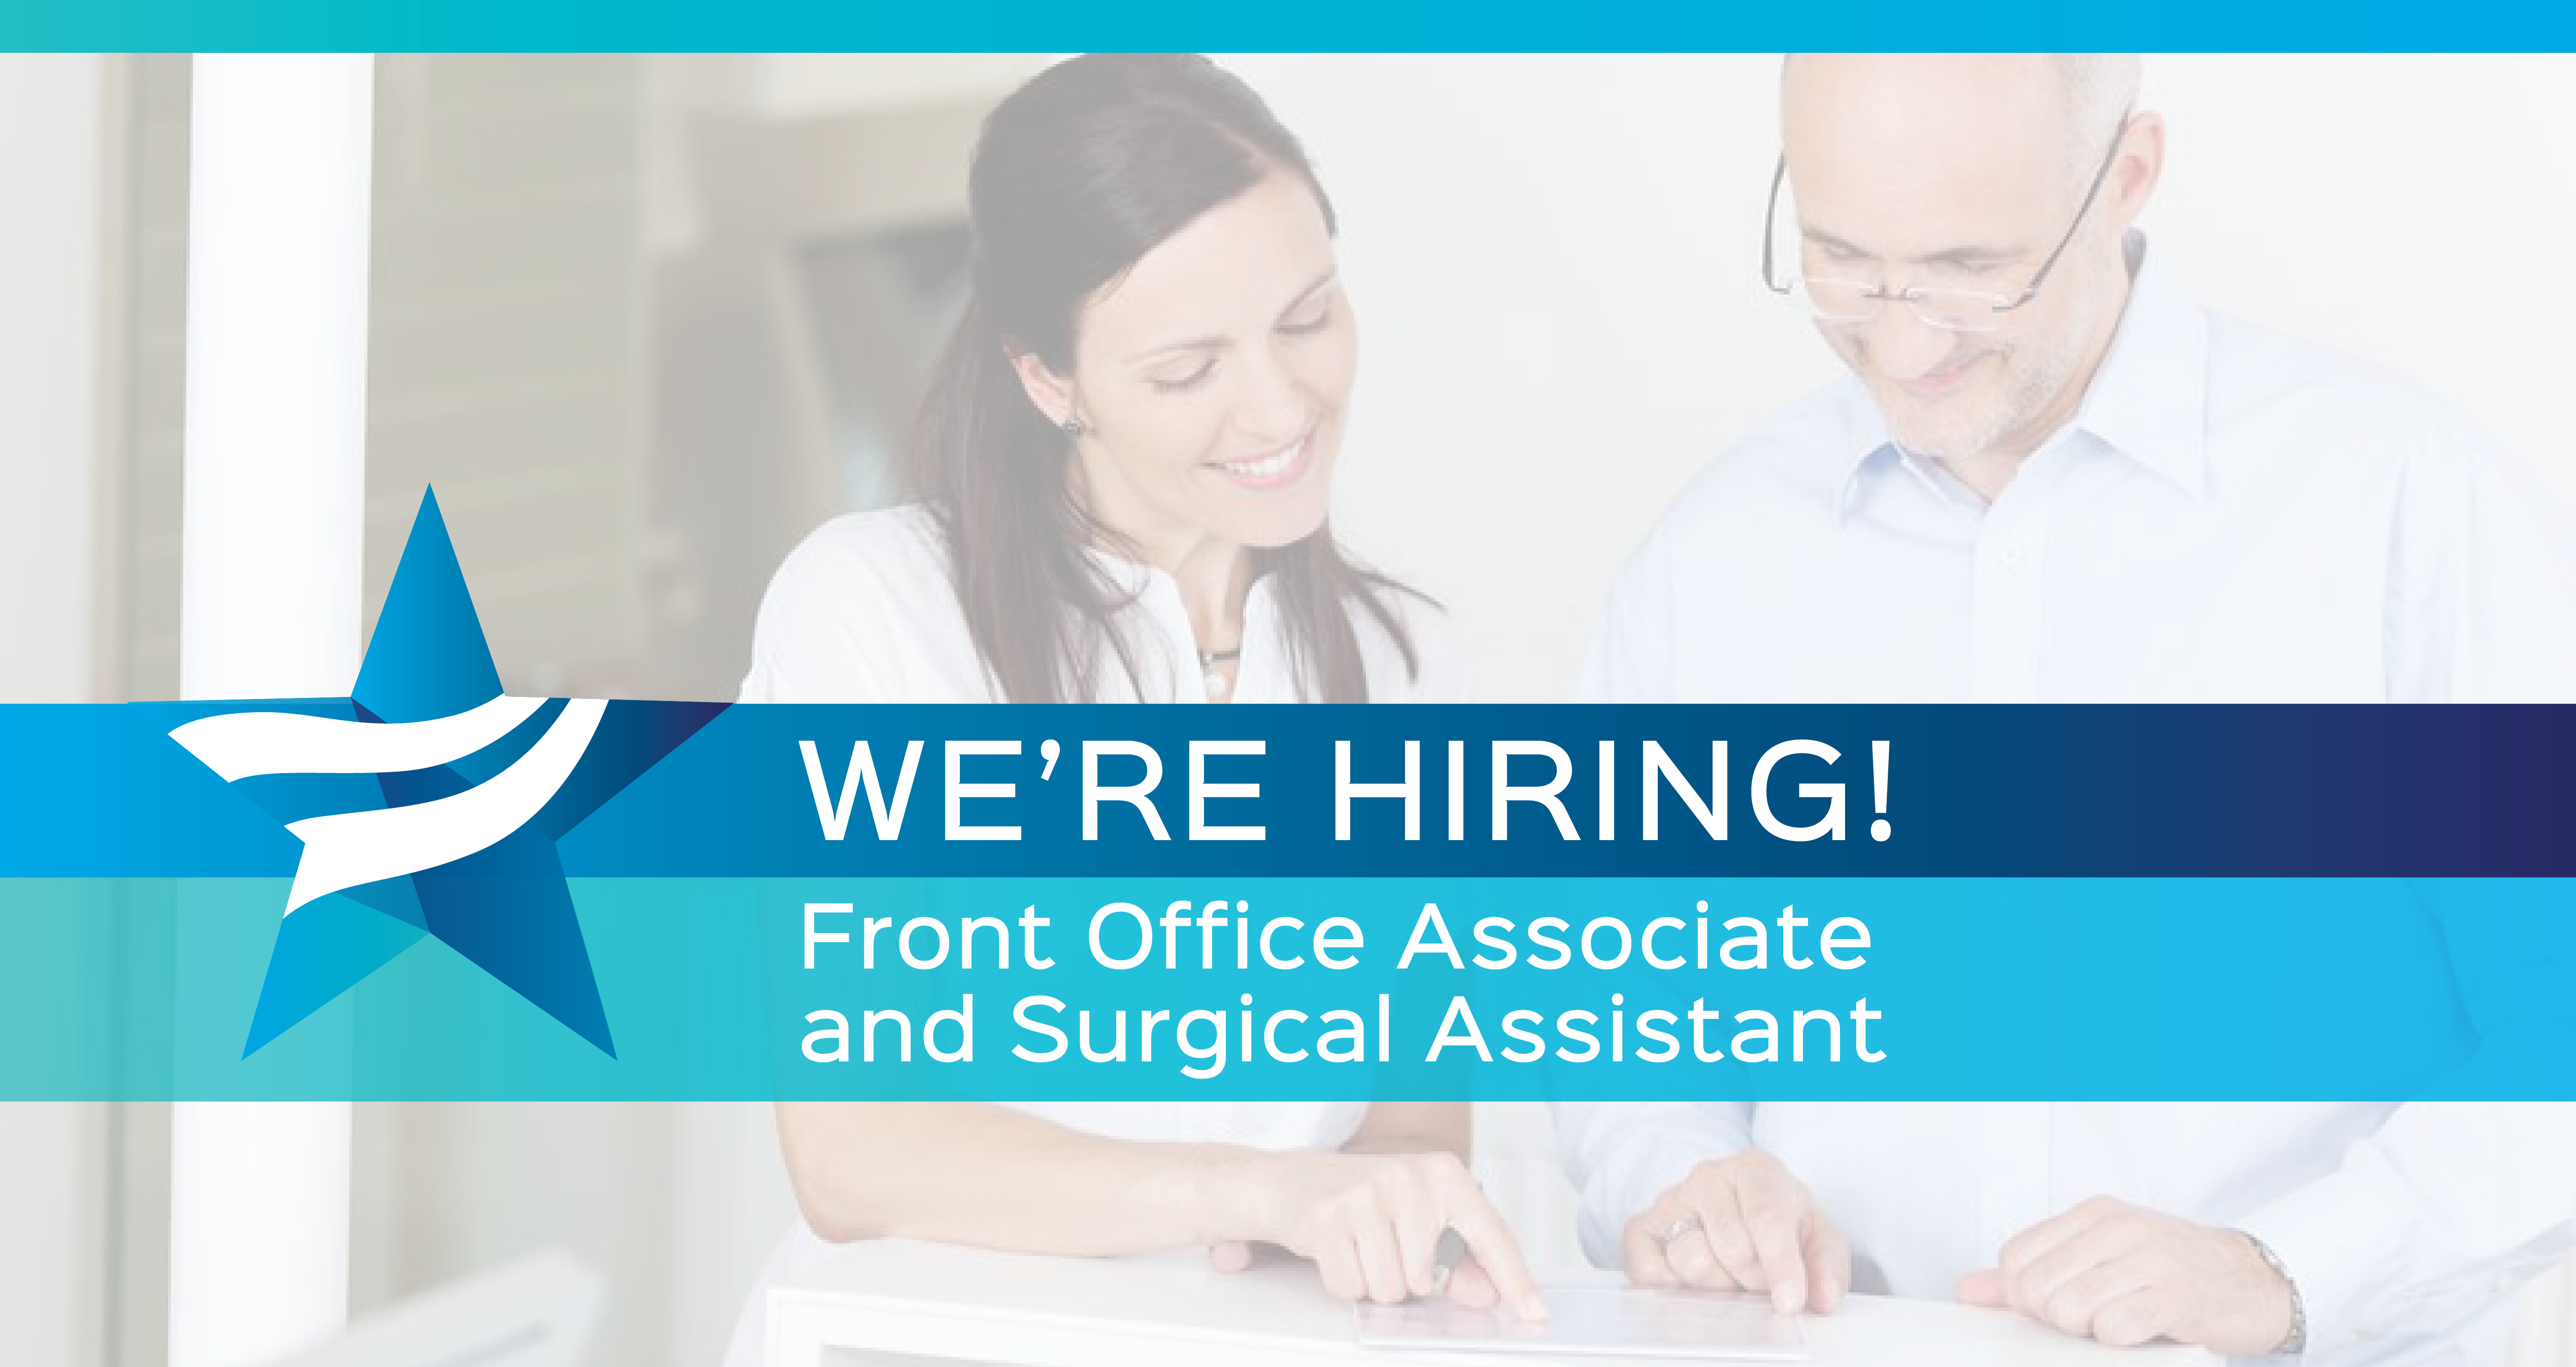 We're Hiring a Front Office Associate and Surgical Assistant